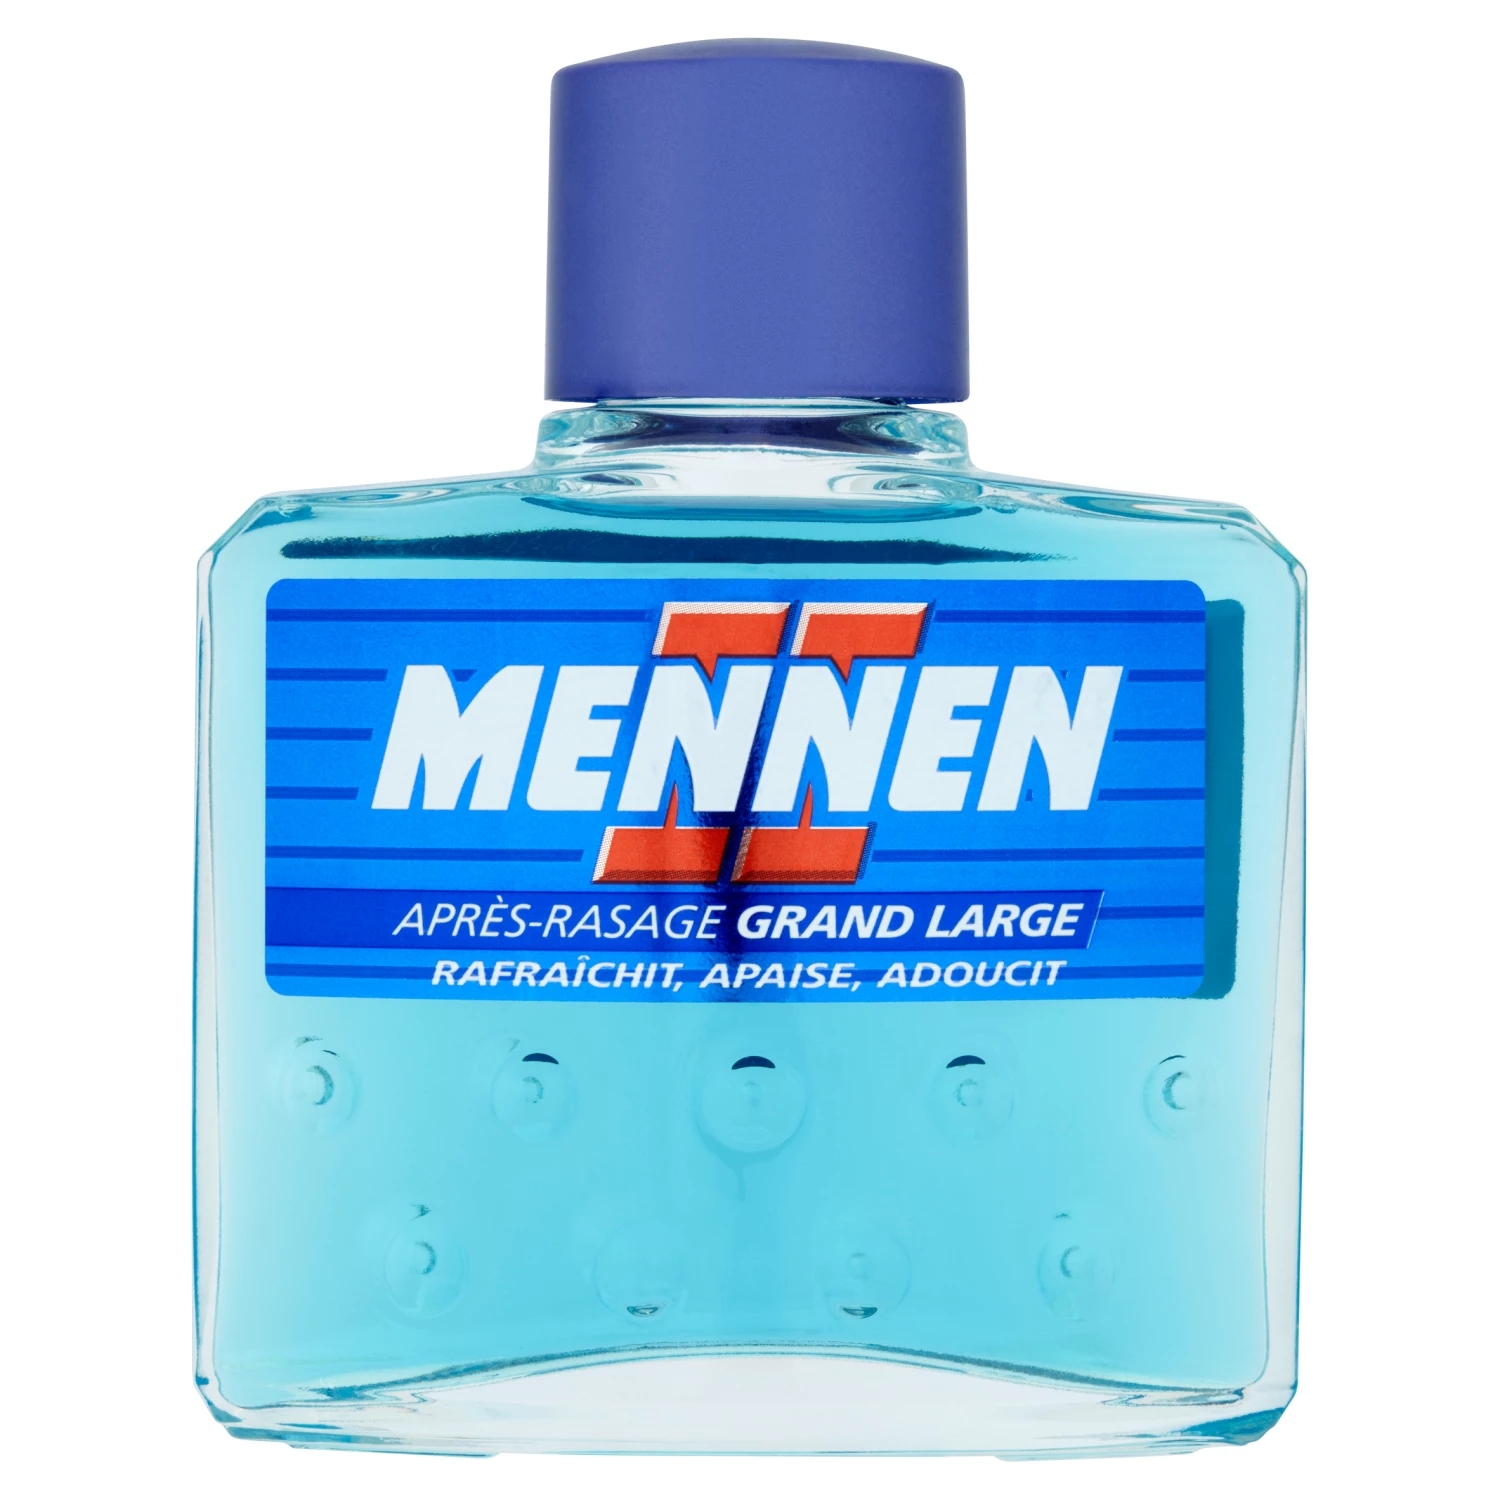 Grand Large Aftershave 125ml - MENNEN